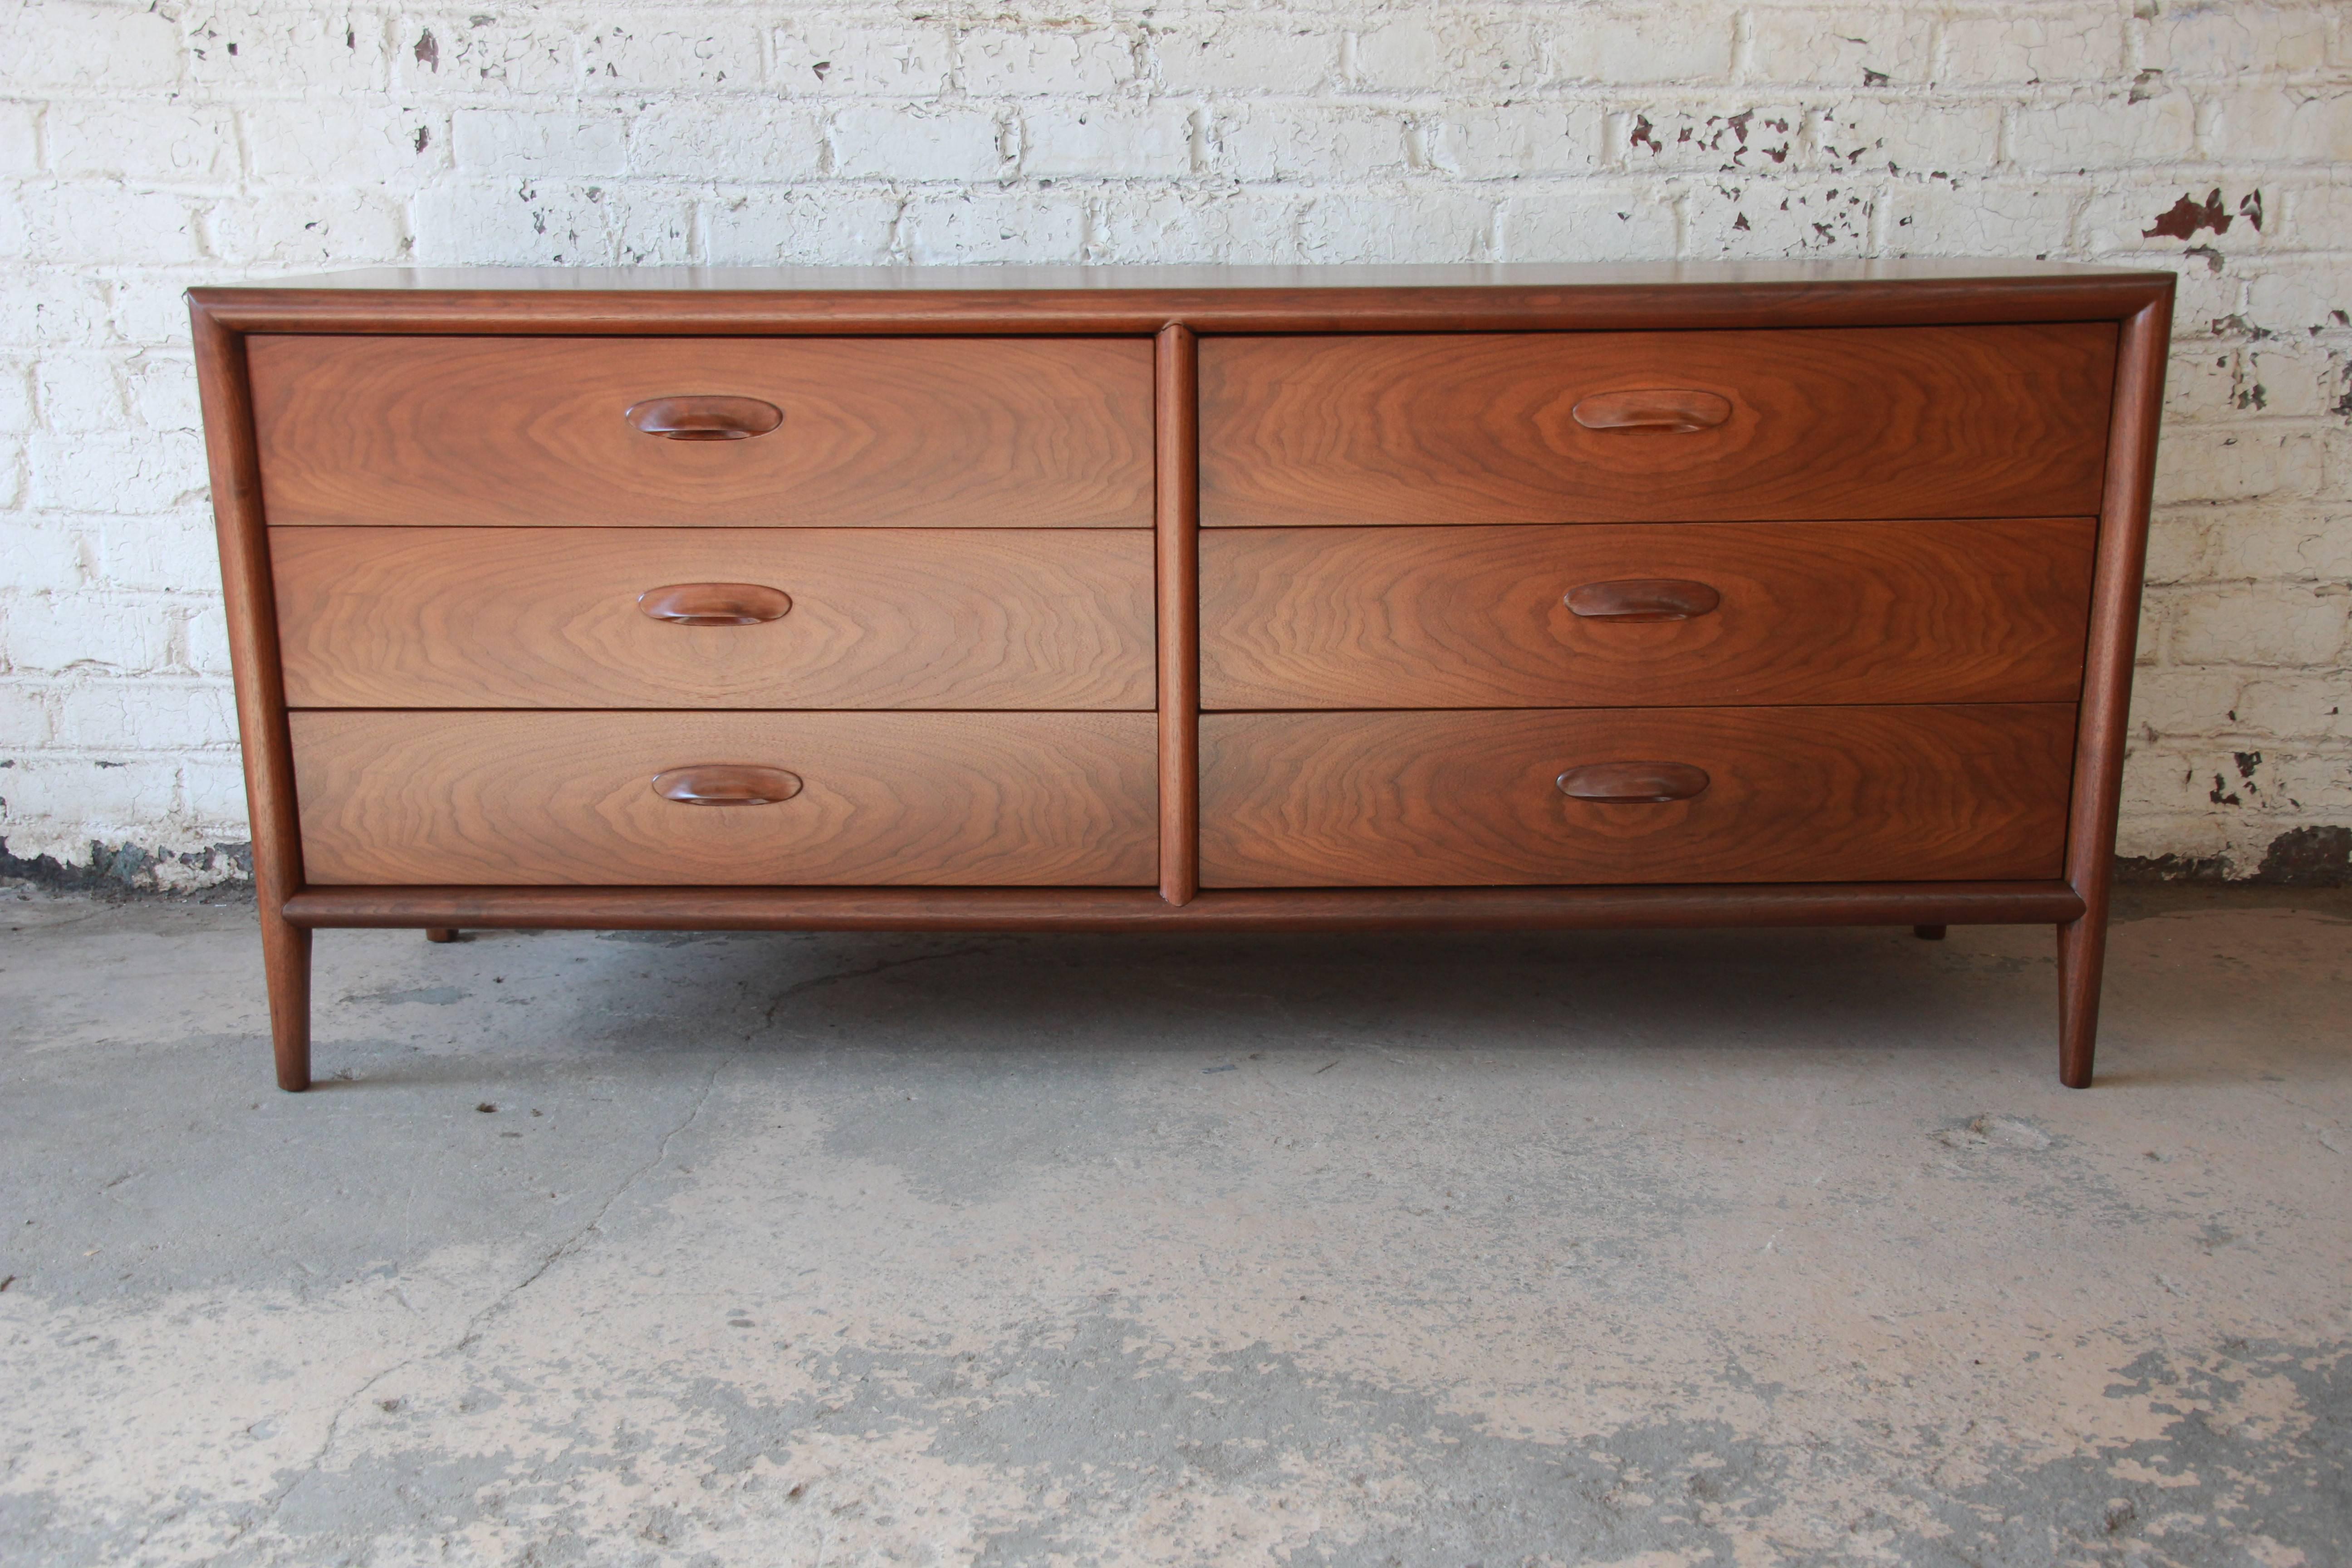 A rare and exceptional Mid-Century Modern walnut six-drawer dresser or credenza by Widdicomb Furniture Co. of Grand Rapids. The dresser features gorgeous walnut wood grain and sculpted wood drawer pulls. It offers ample room for storage, with six